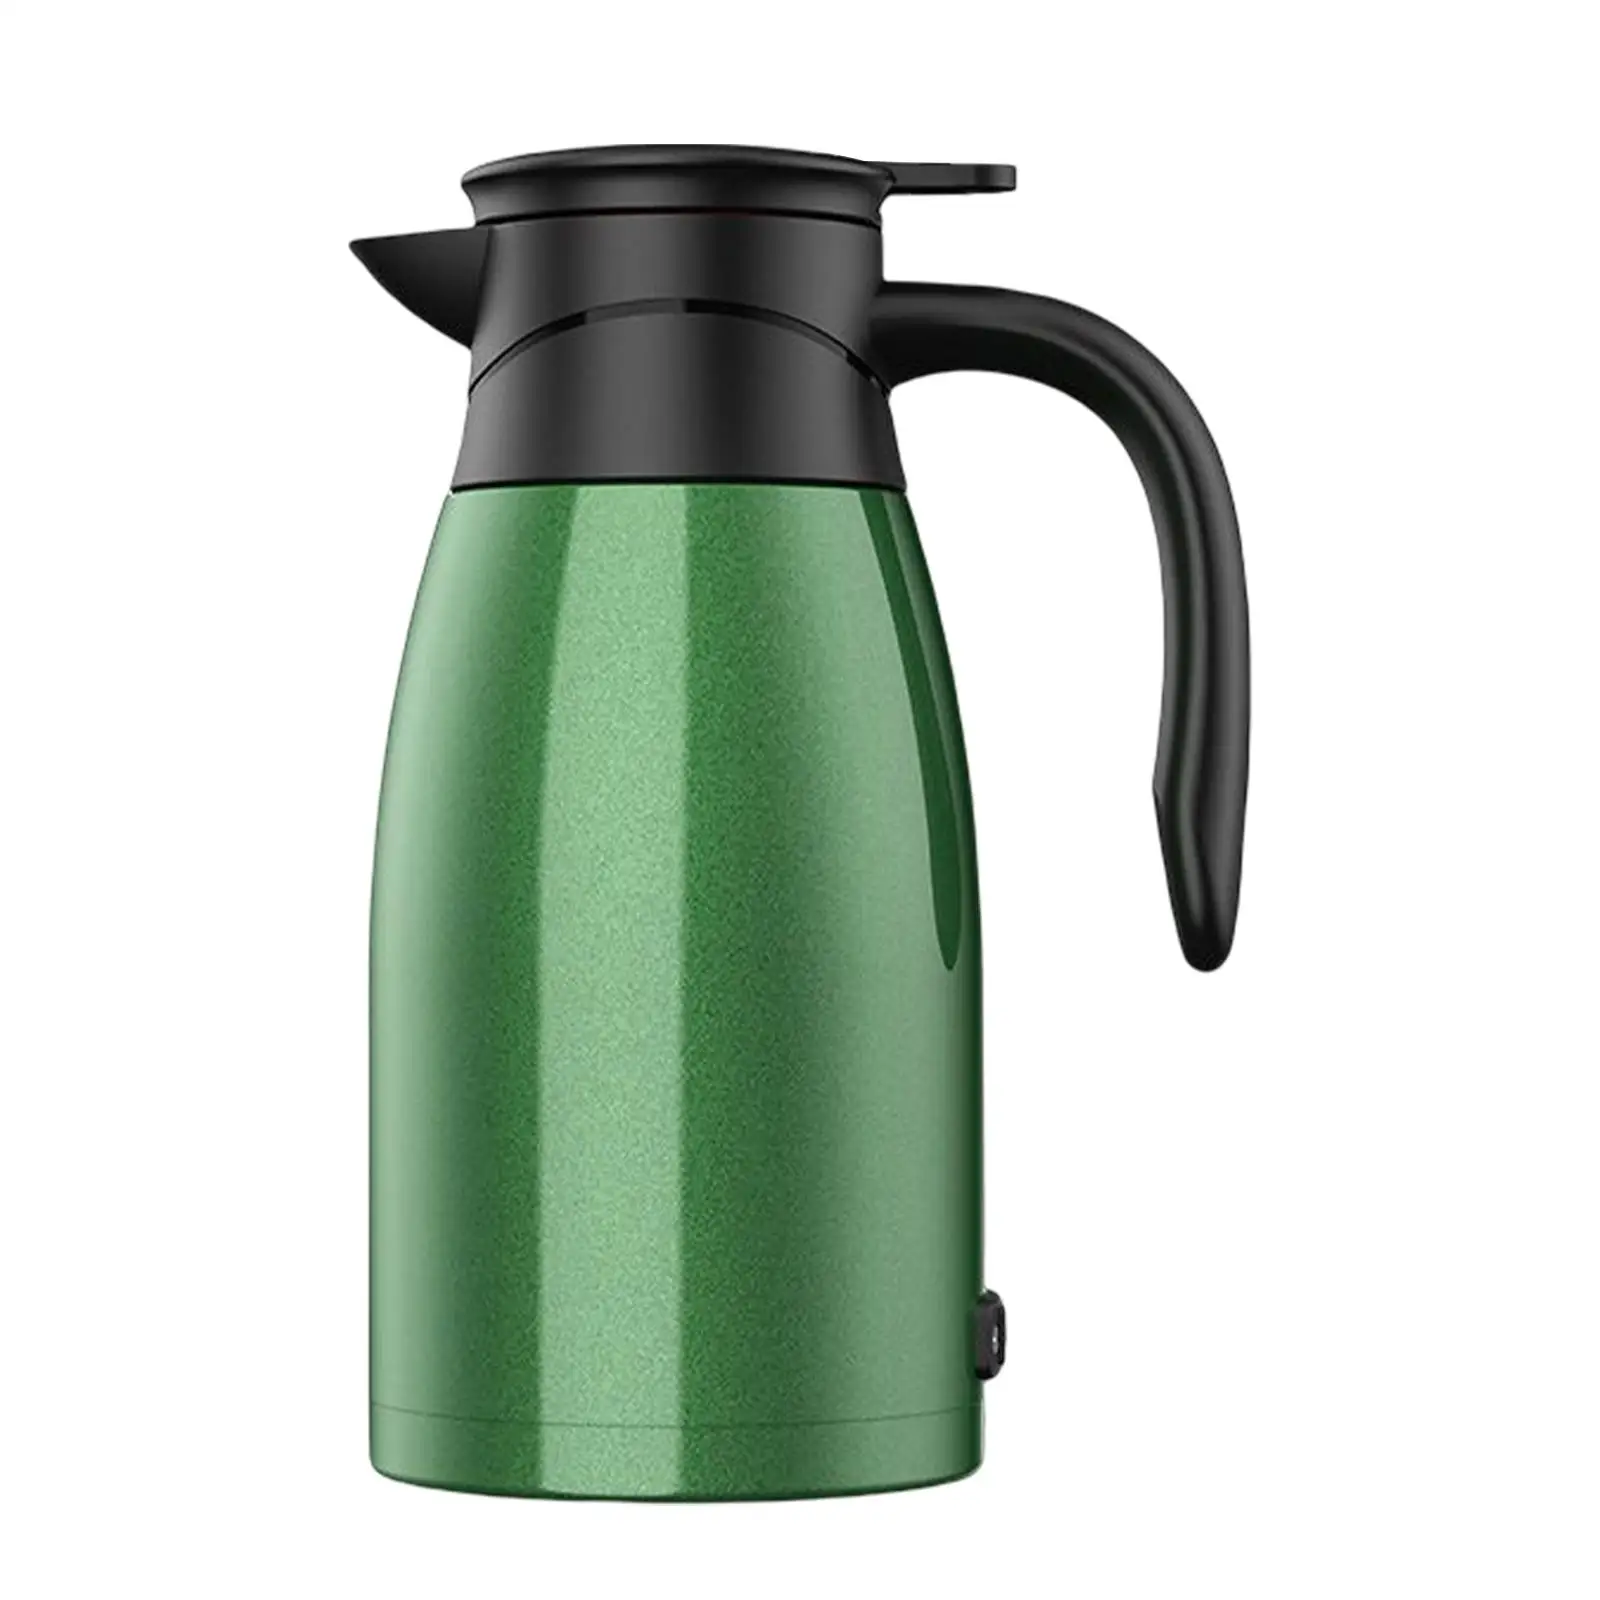 12V Car Kettle Boiler Stainless Steel Heating Cup for Camping Outdoor